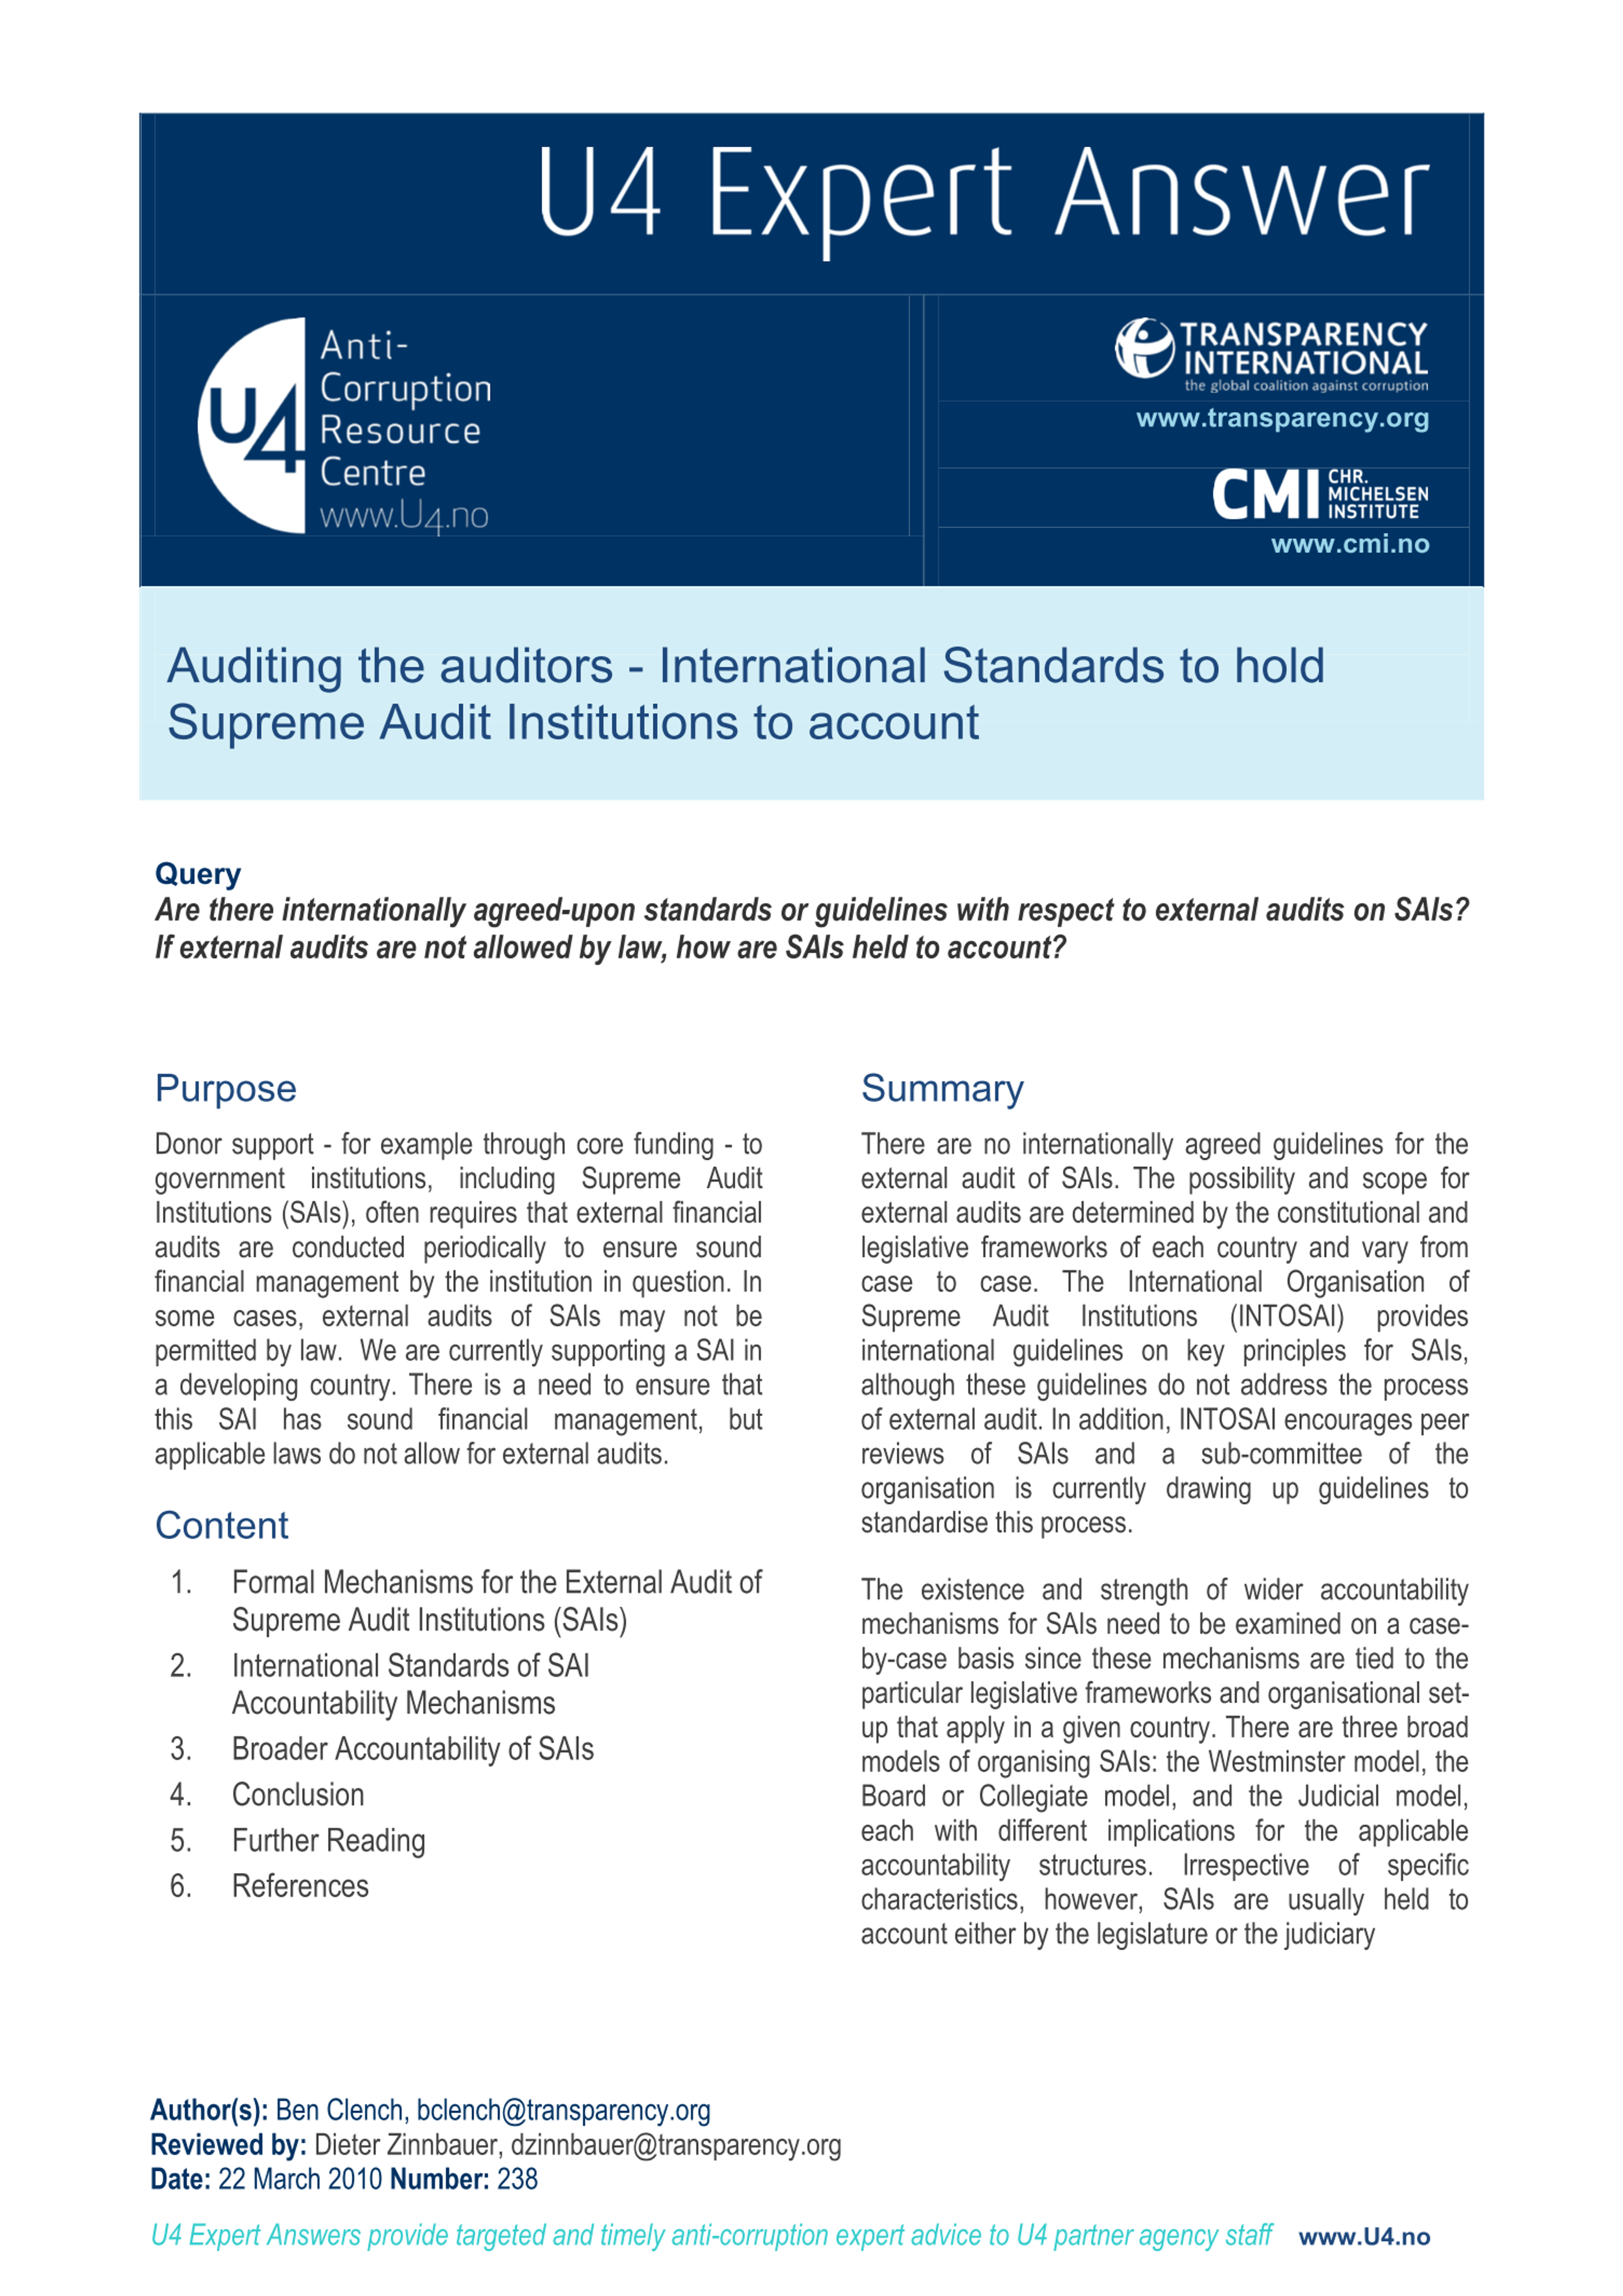 Auditing the auditors - International Standards to hold Supreme Audit Institutions to account